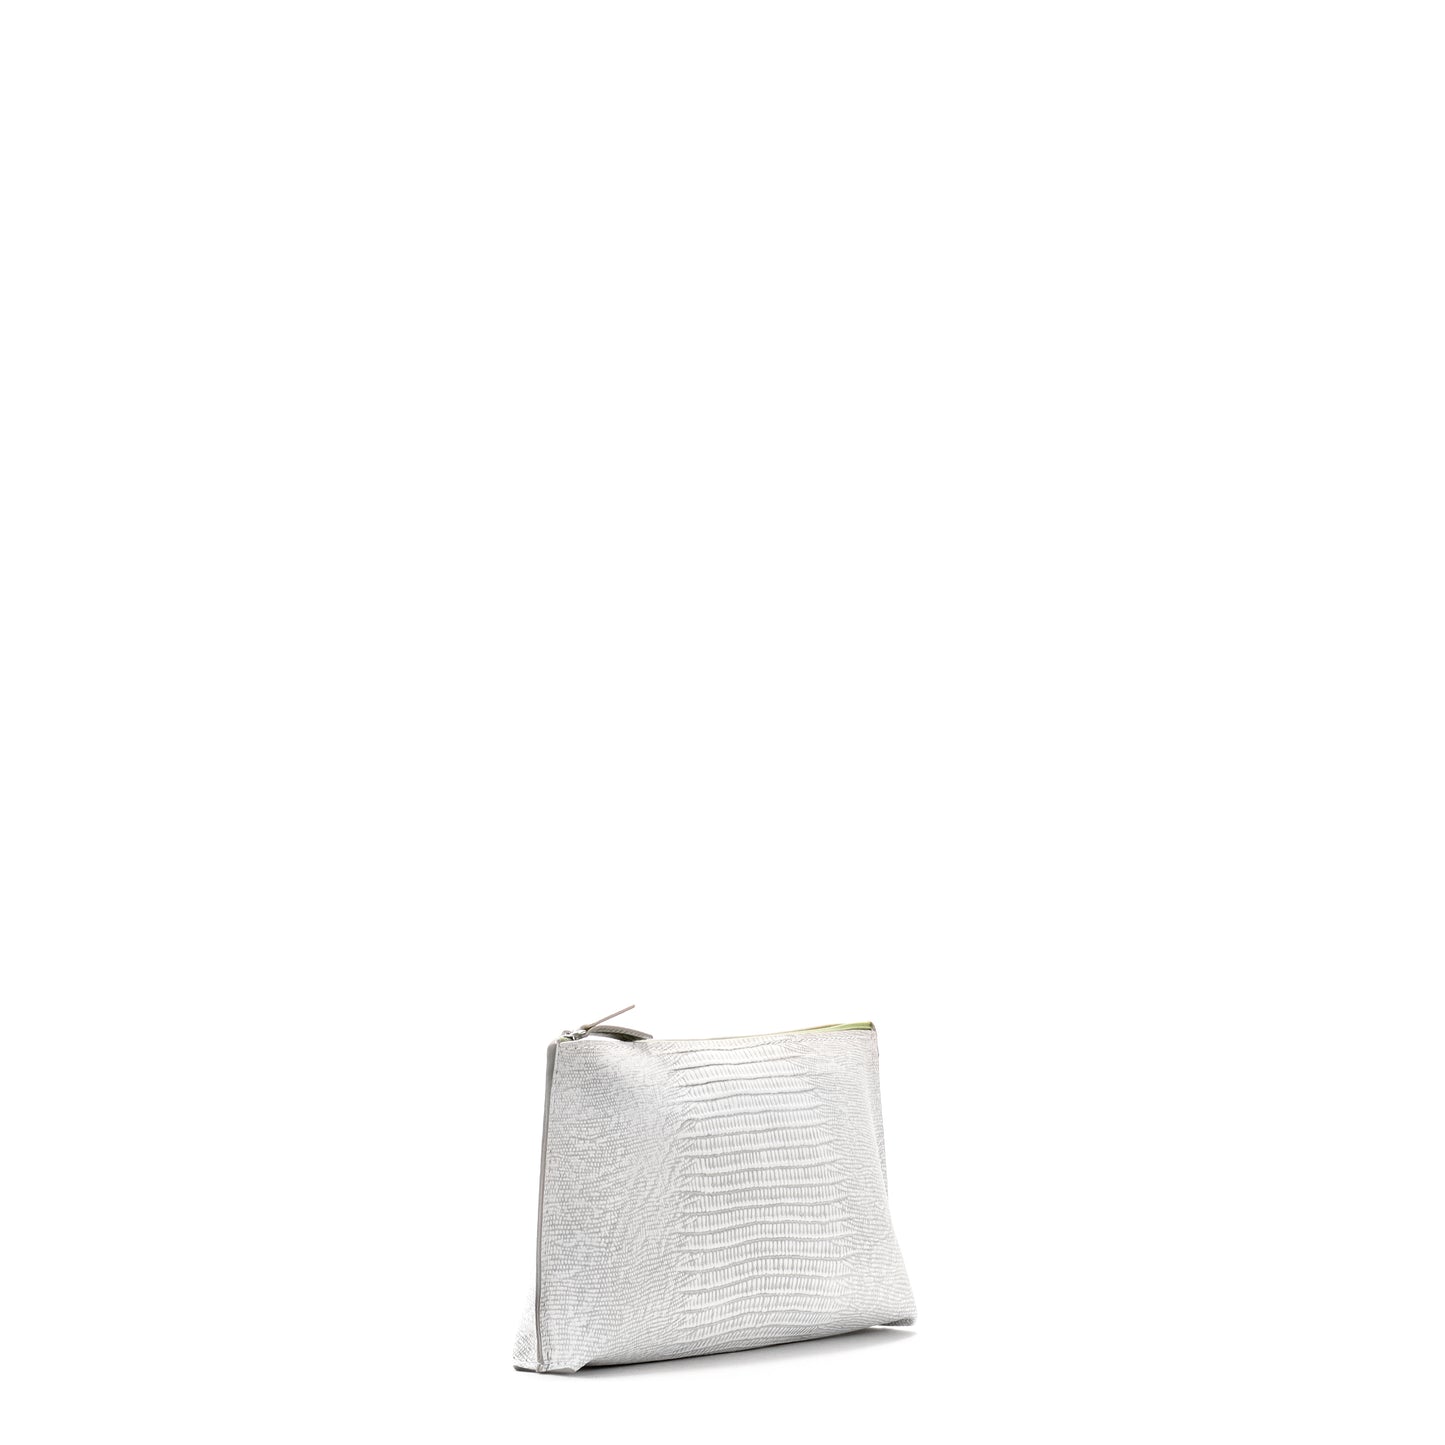 ESSENTIAL POUCH ANTIQUE WHITE EMBOSSED LIZARD